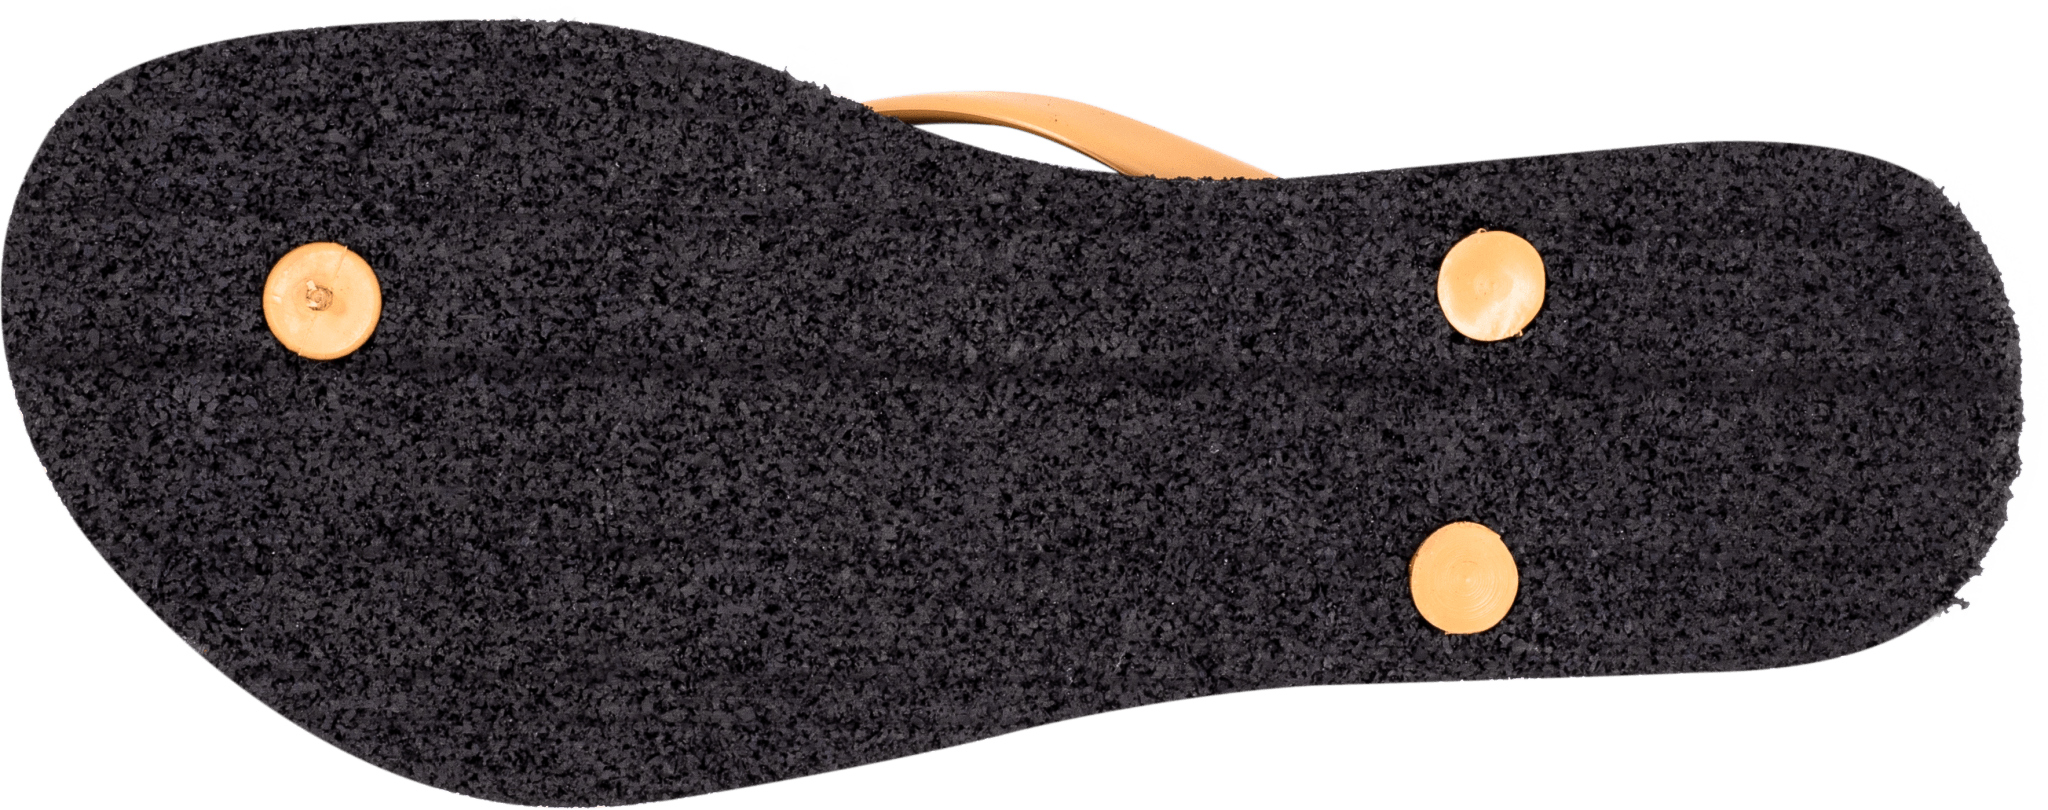 Women's Recycled Tire Rubber Flip Flops- Tancategory_Accessories from Savanna Sandals - SHOPELEOS